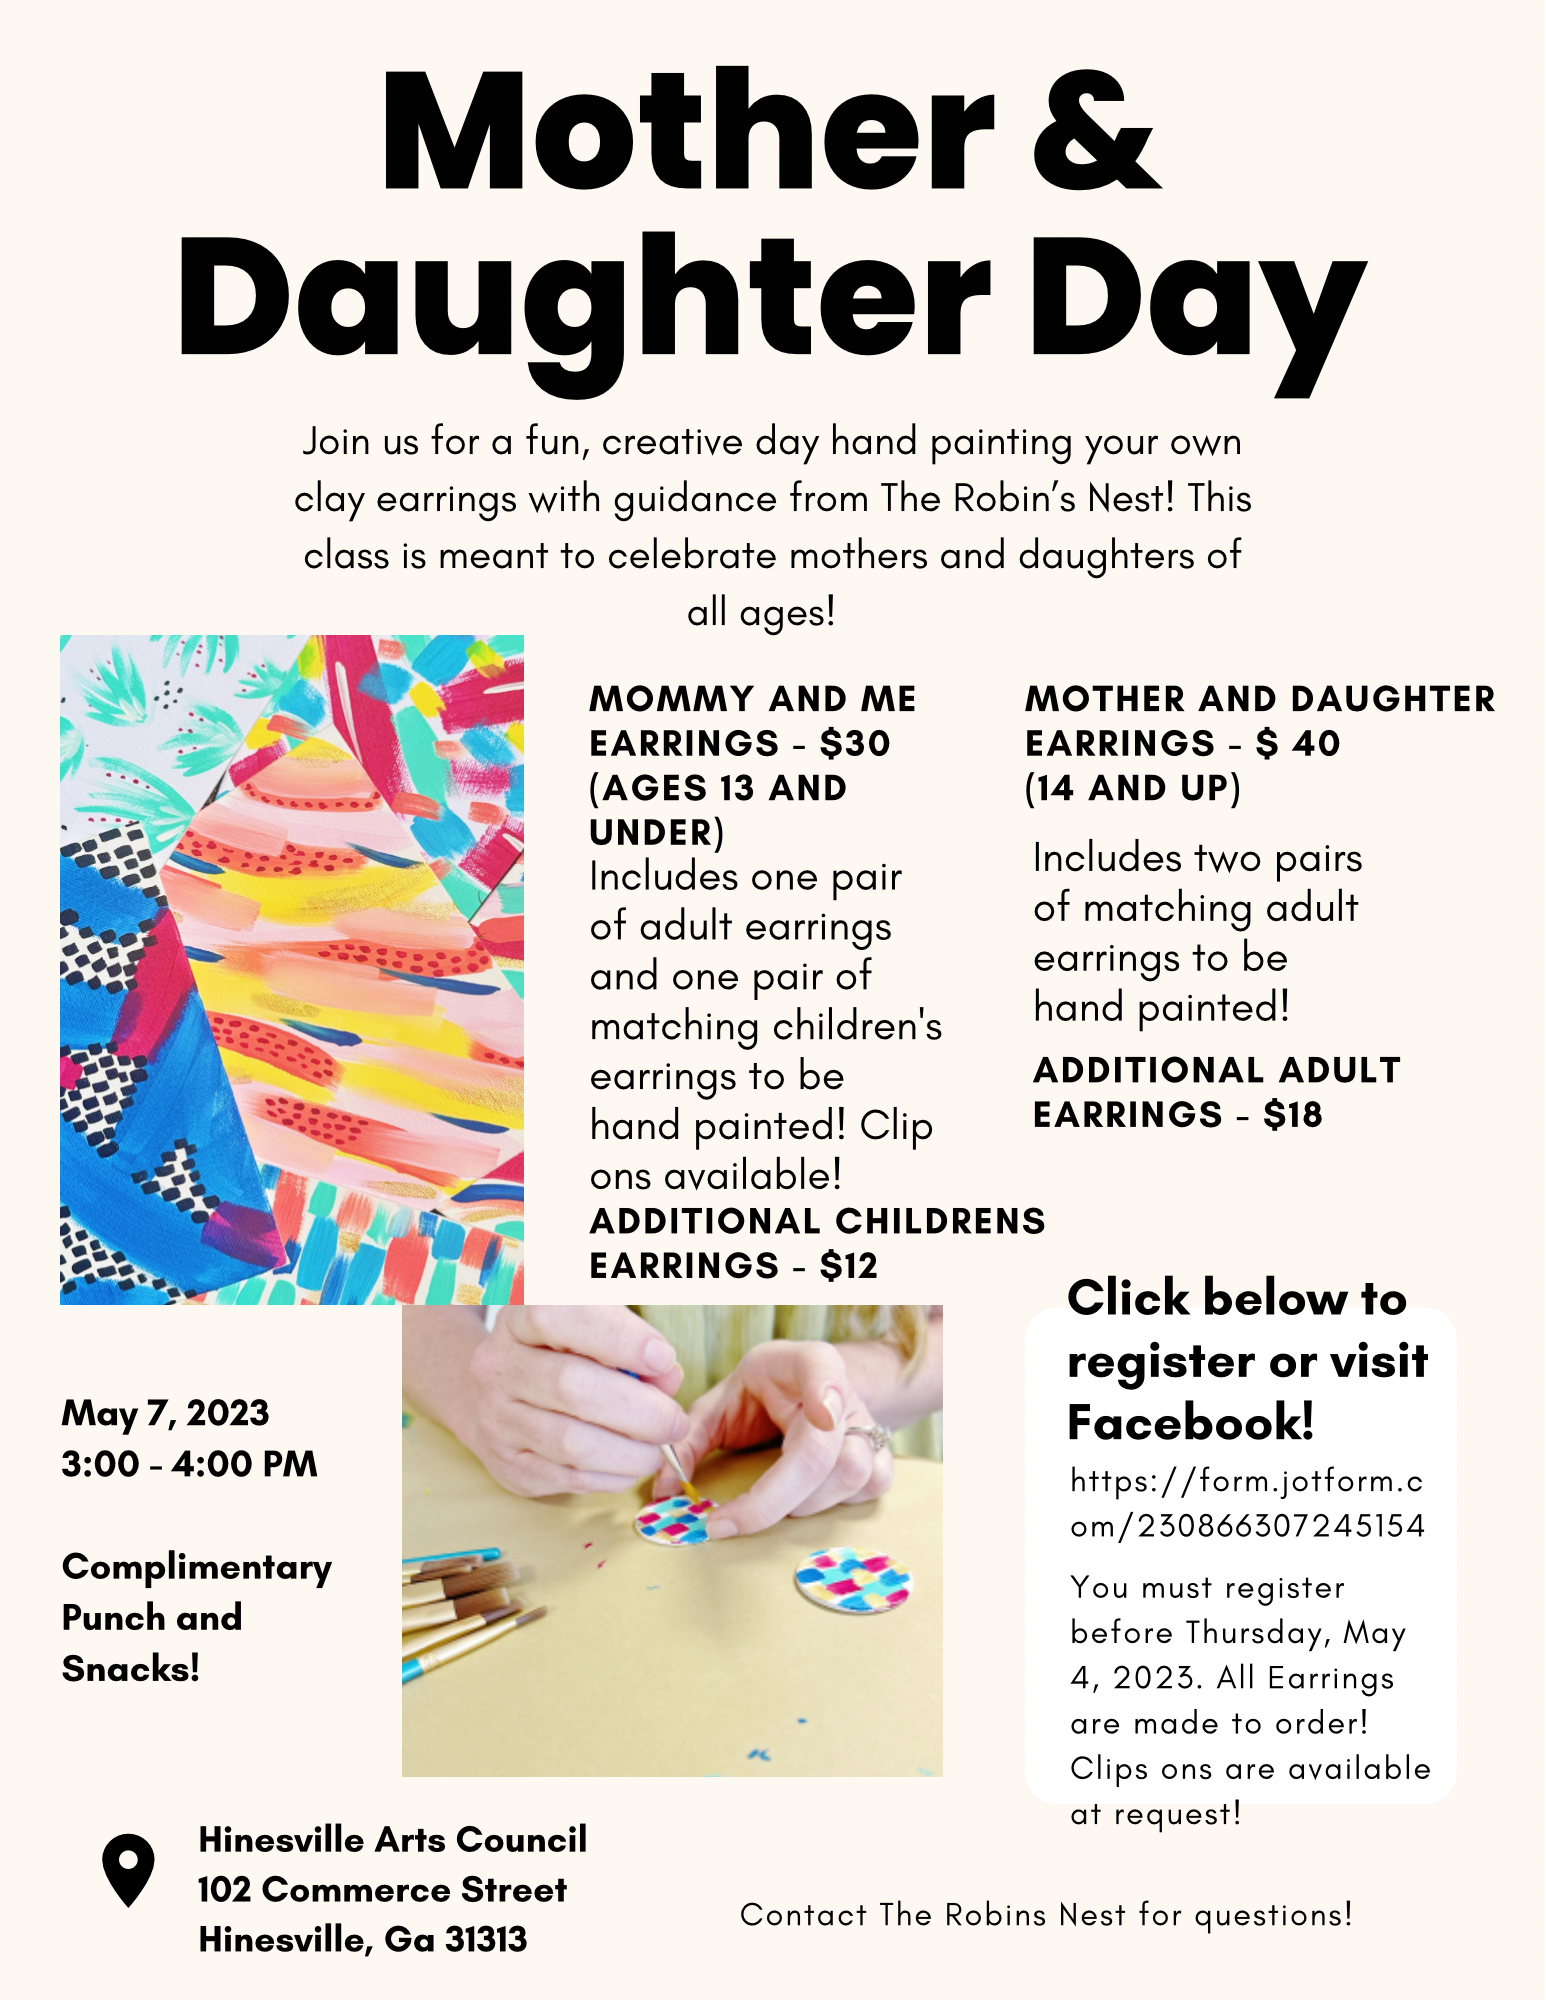 Mother & Daughter Day flyer